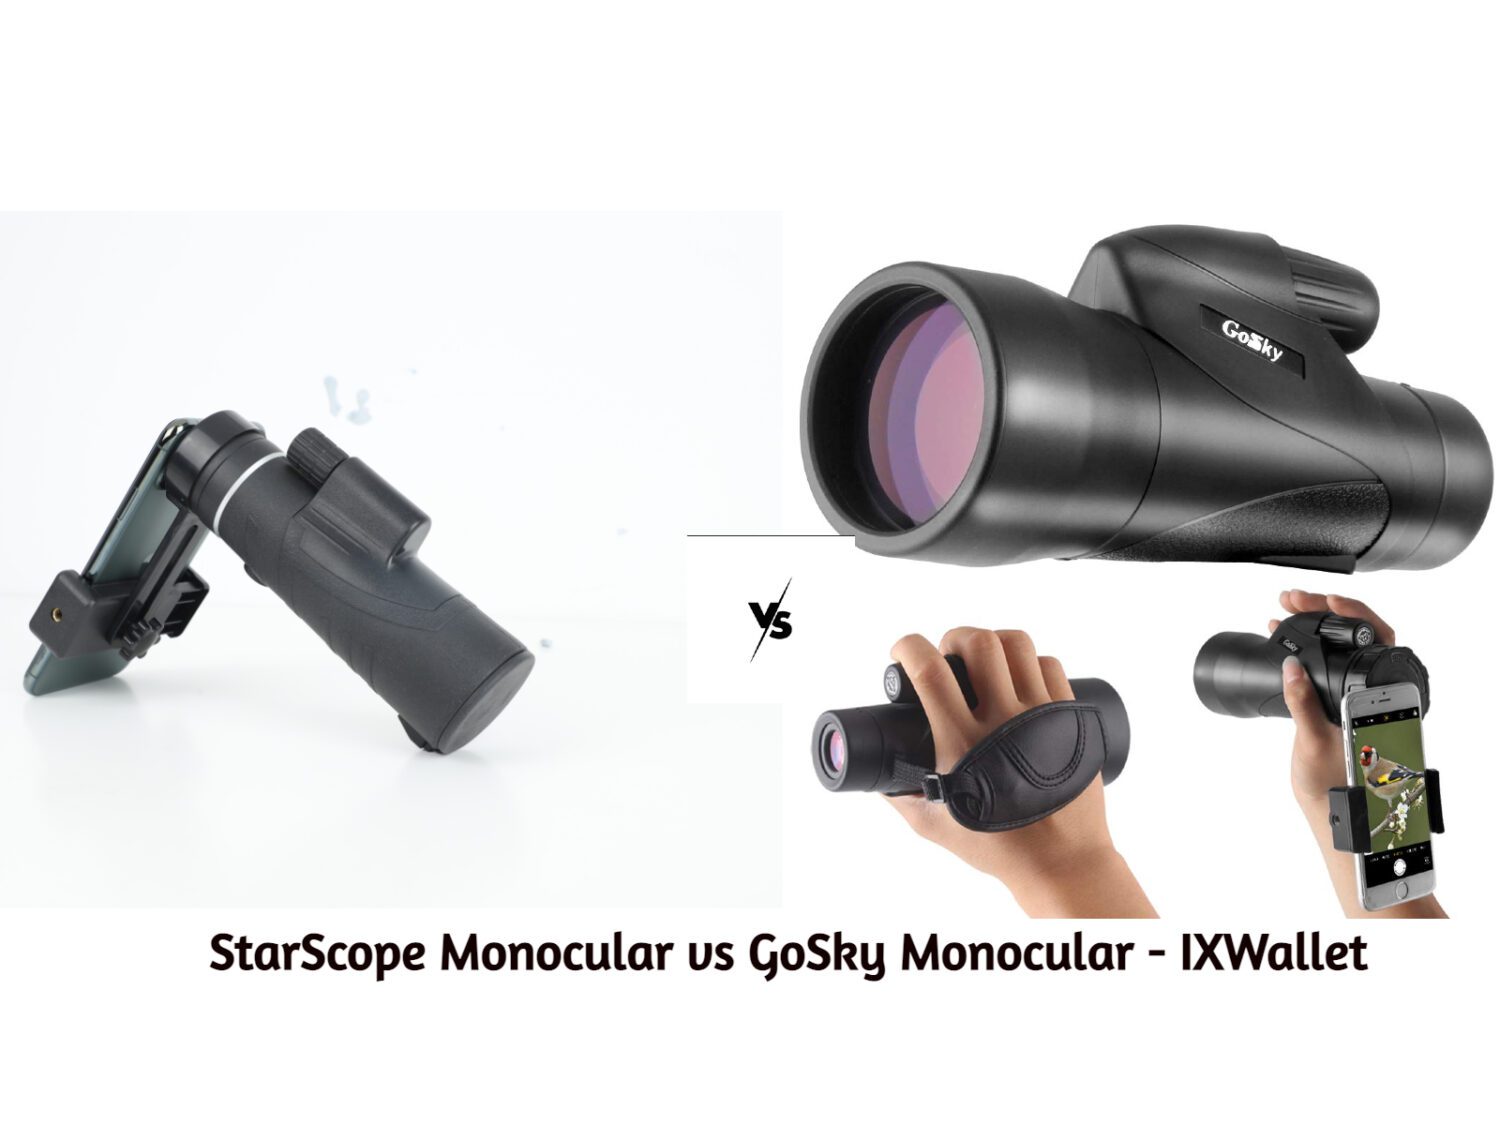 StarScope Monocular Vs GoSky: Guide To Select Between The Two Most Popular Monoculars